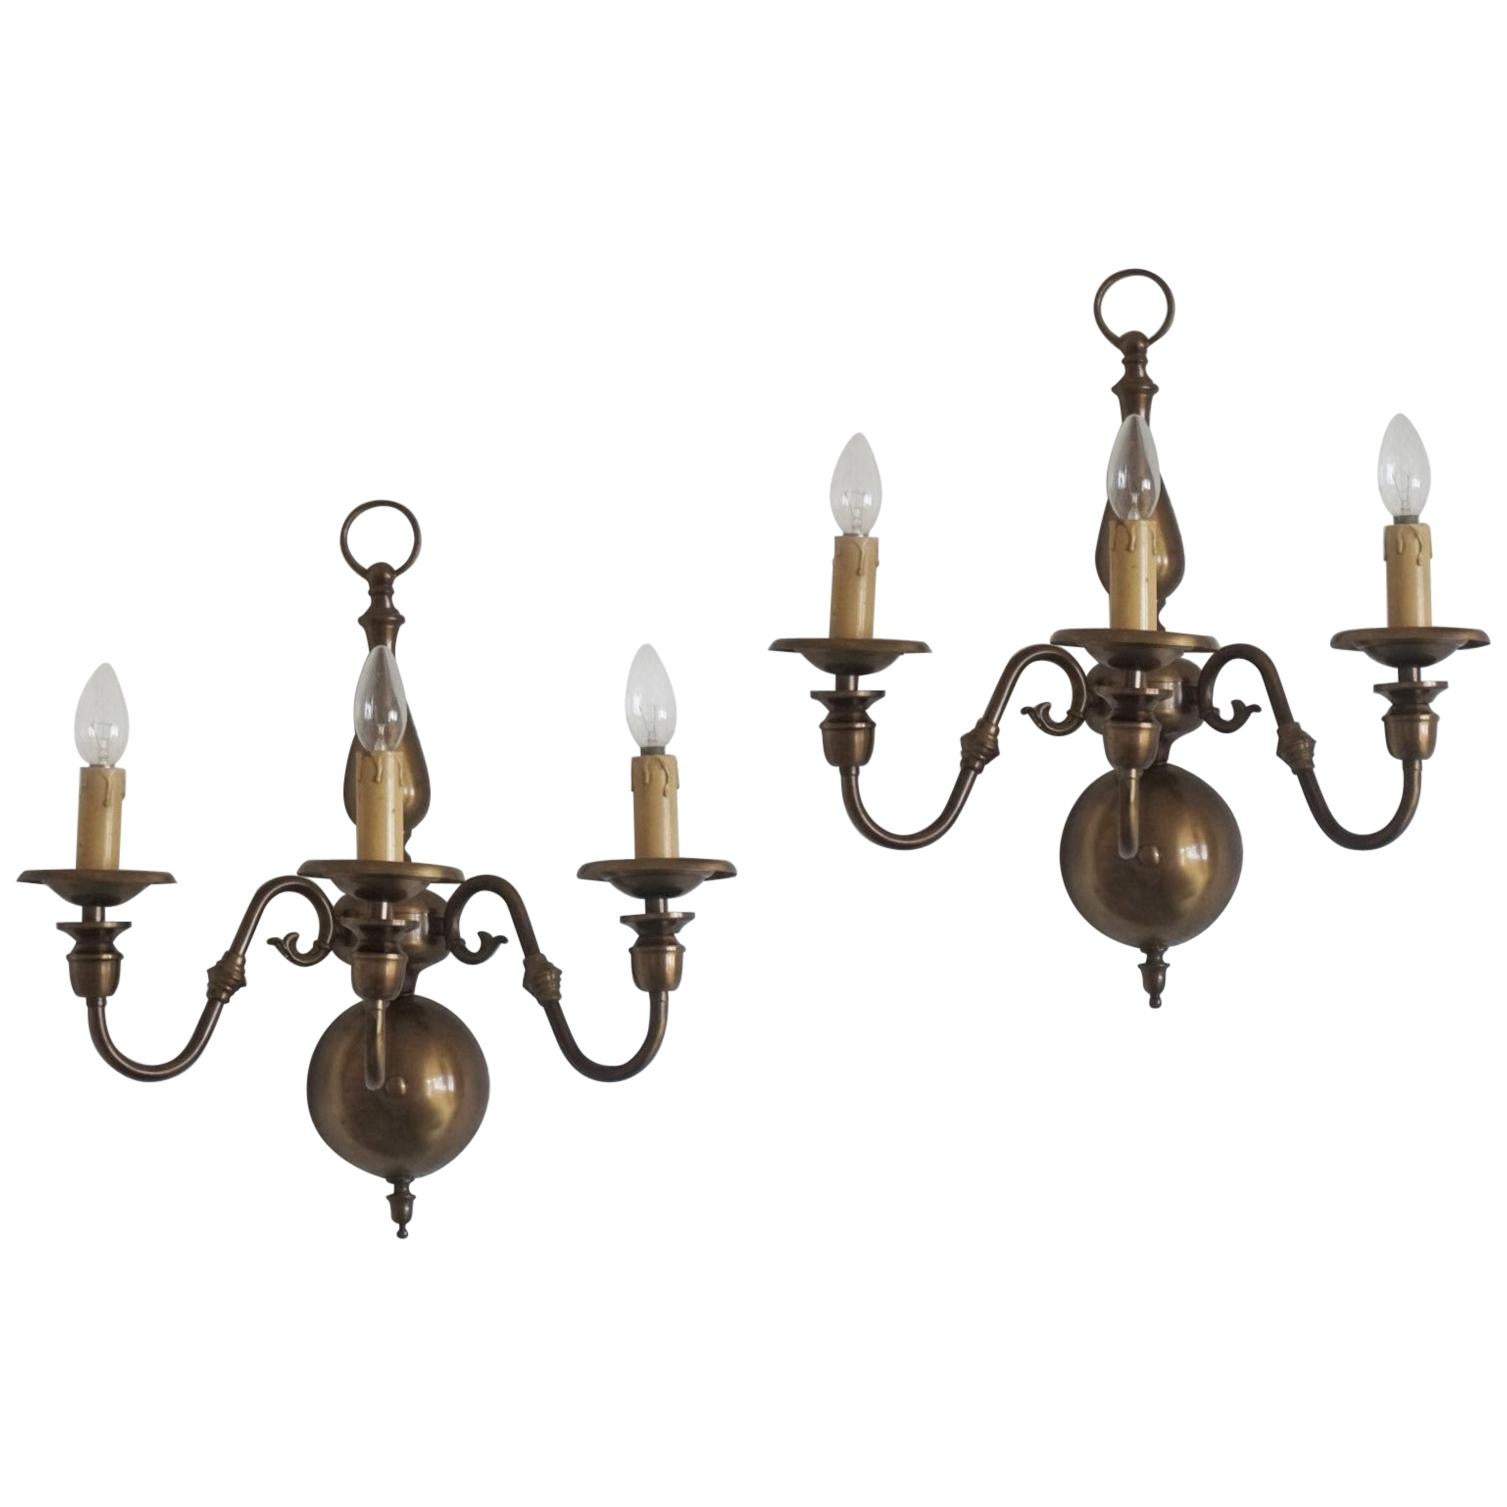 Pair of Dutch or Flemish hand cast brass wall sconces from the 1930s with three arms in double volute, long nozzles and bulbous bases. Classic
Flemish styling with a baluster or ball shape at the base and long sweeping arms. The brass is solid with